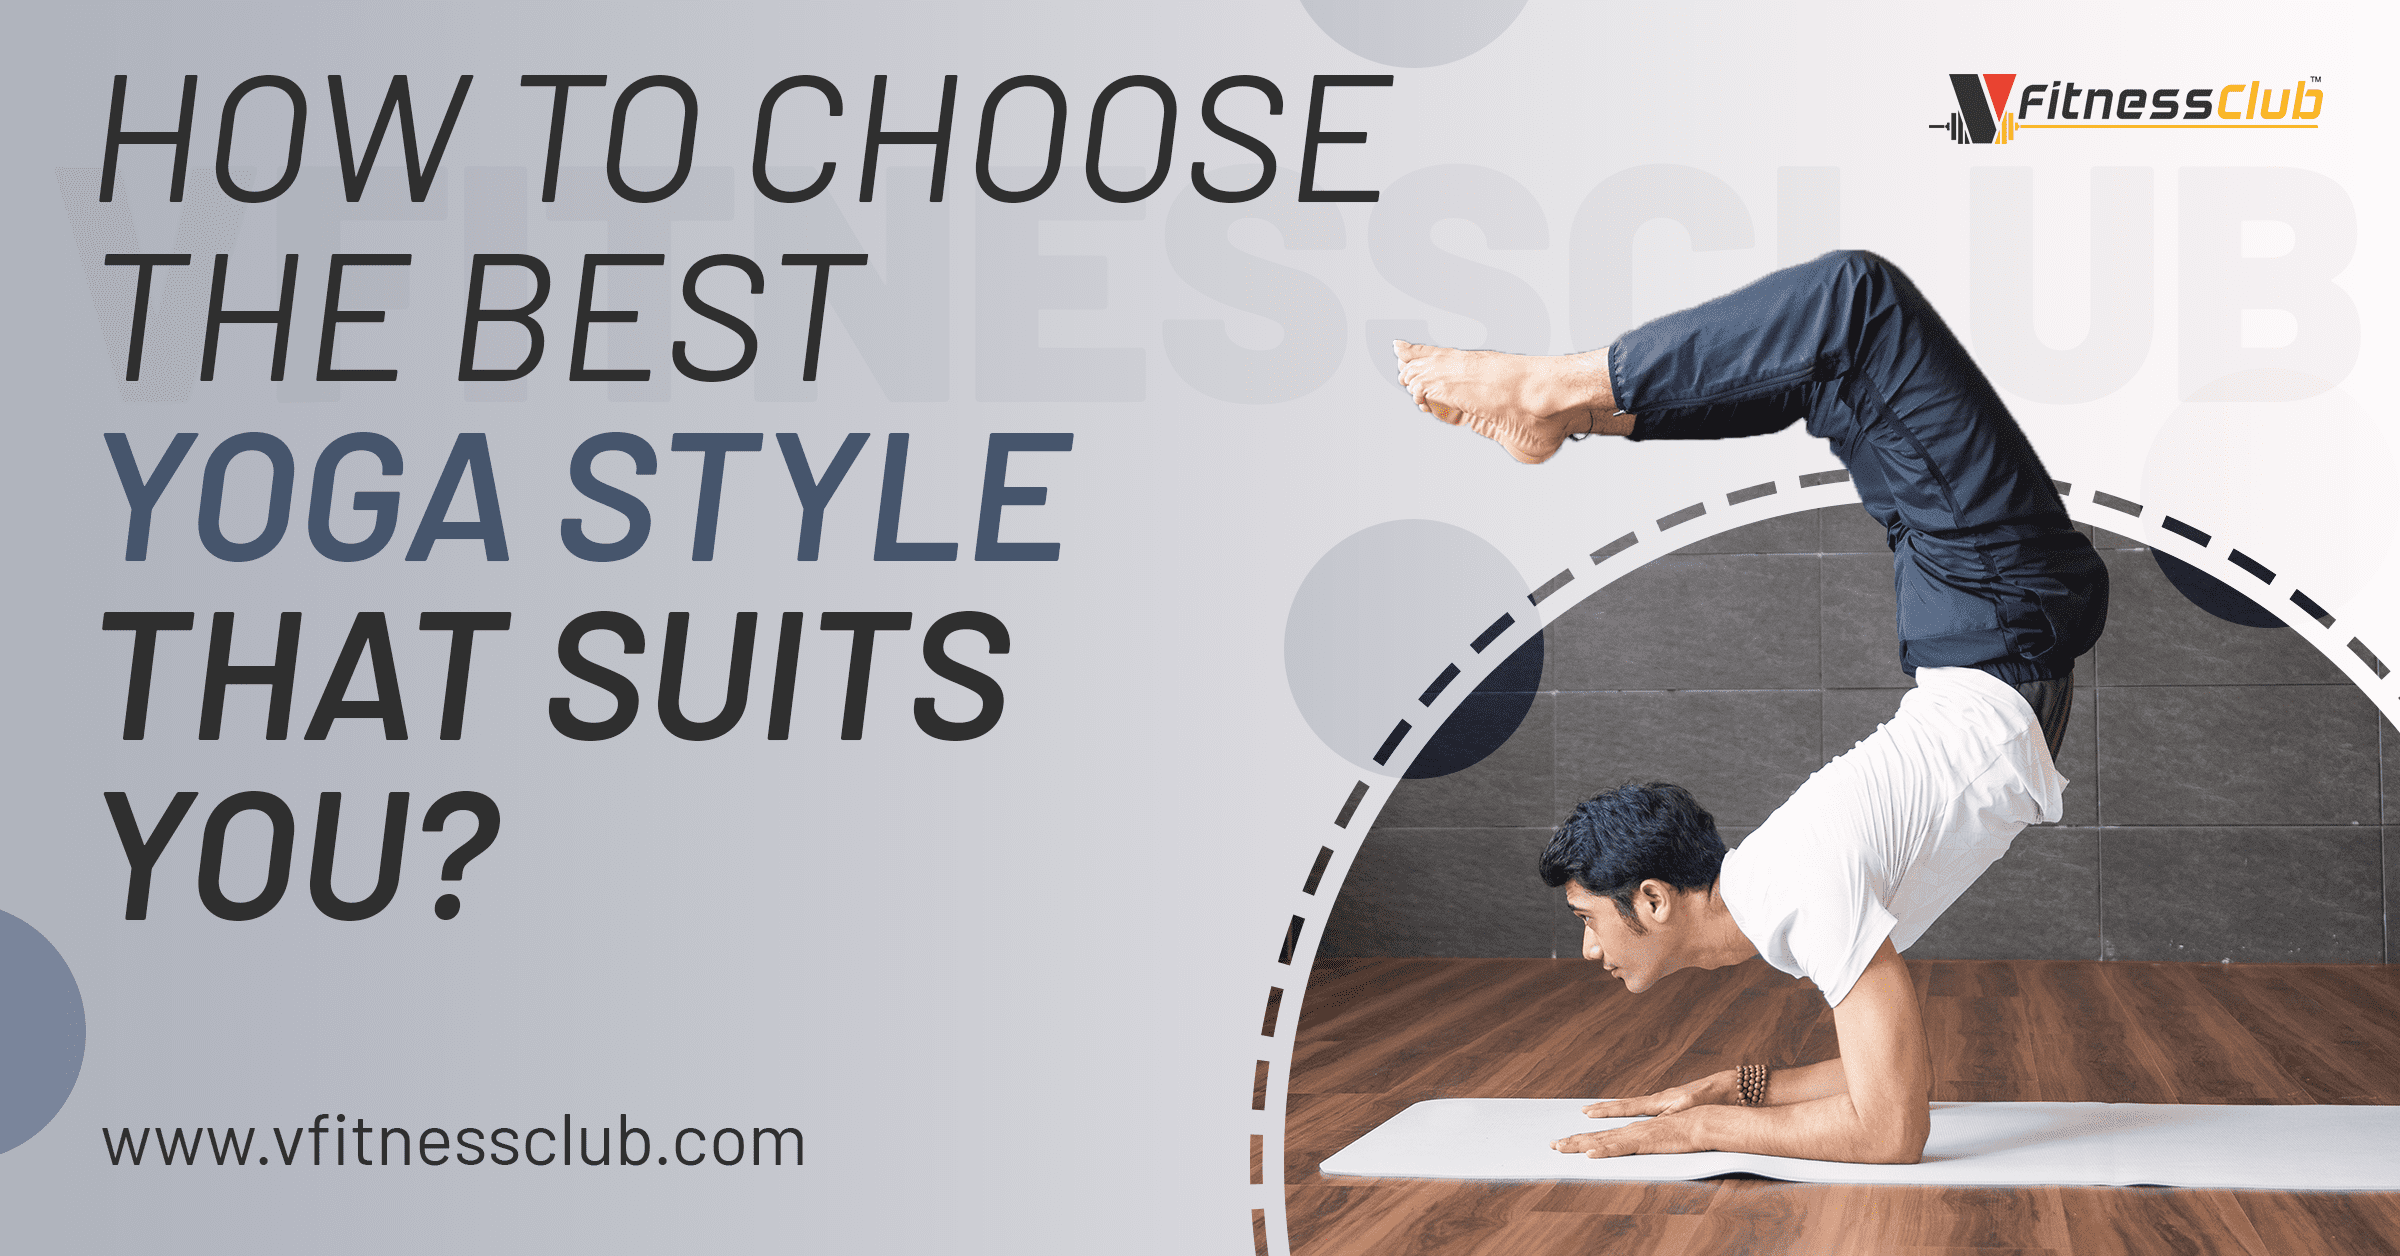 How to Choose the Best Yoga Style that Suits You?